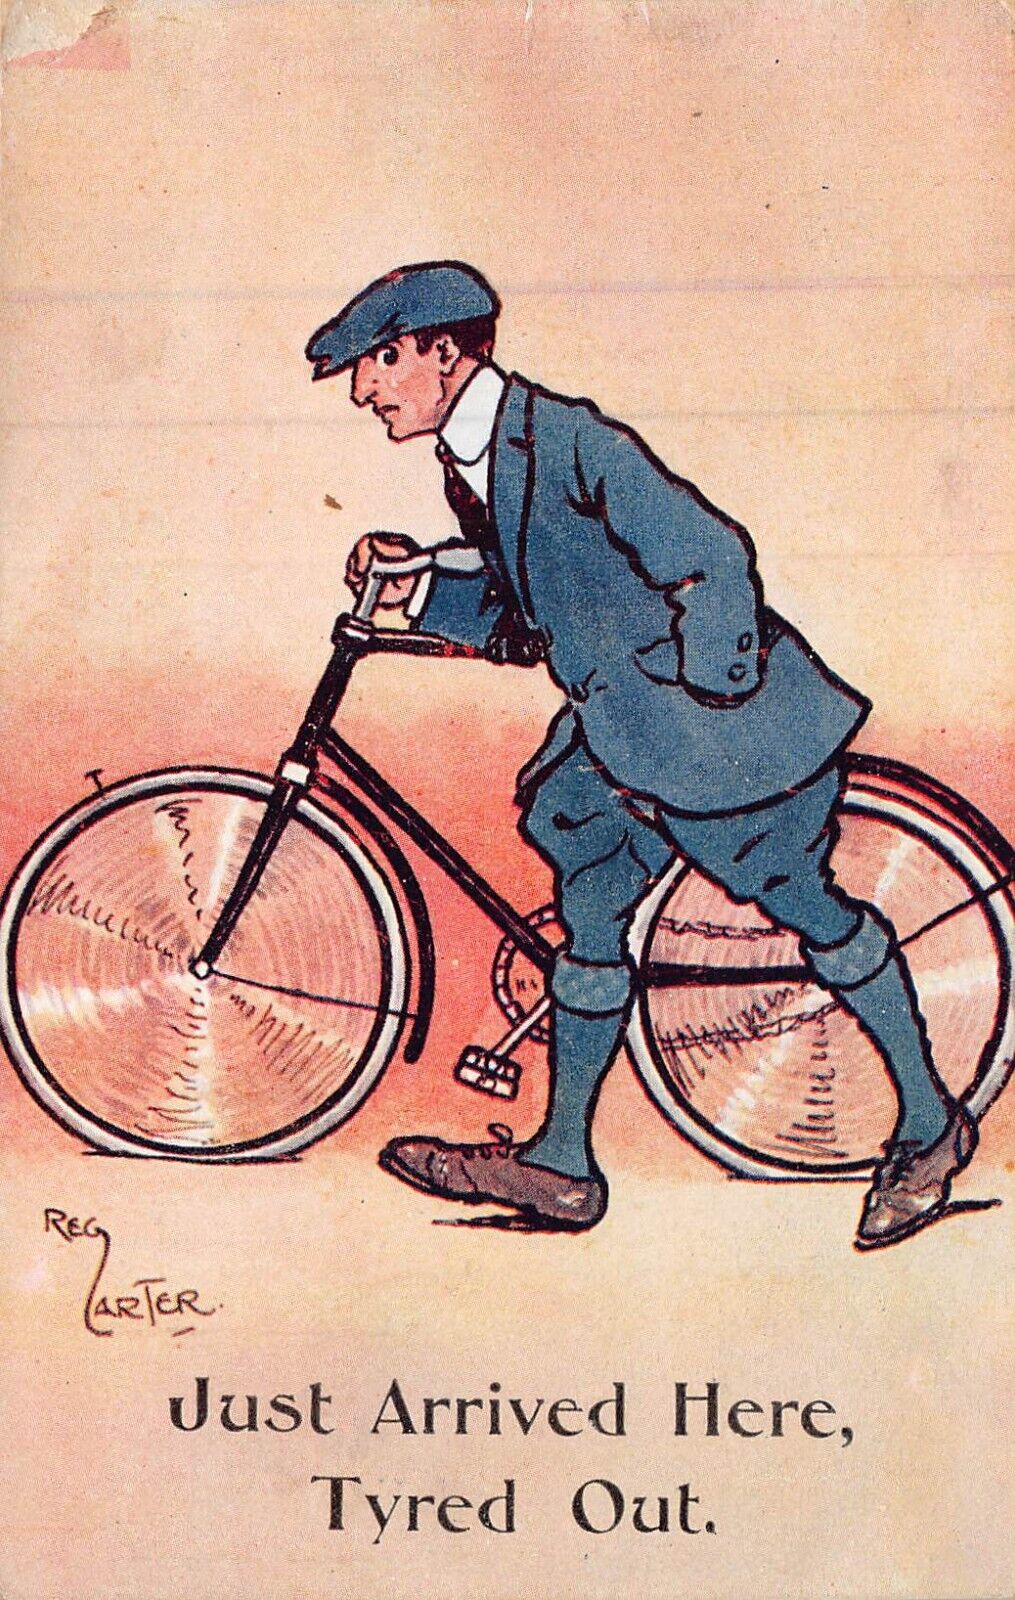 JUST ARRIVED-TYRED OUT-MAN BICYCLE FLAT TIRES~REG CARTER COMIC~1912 POSTCARD